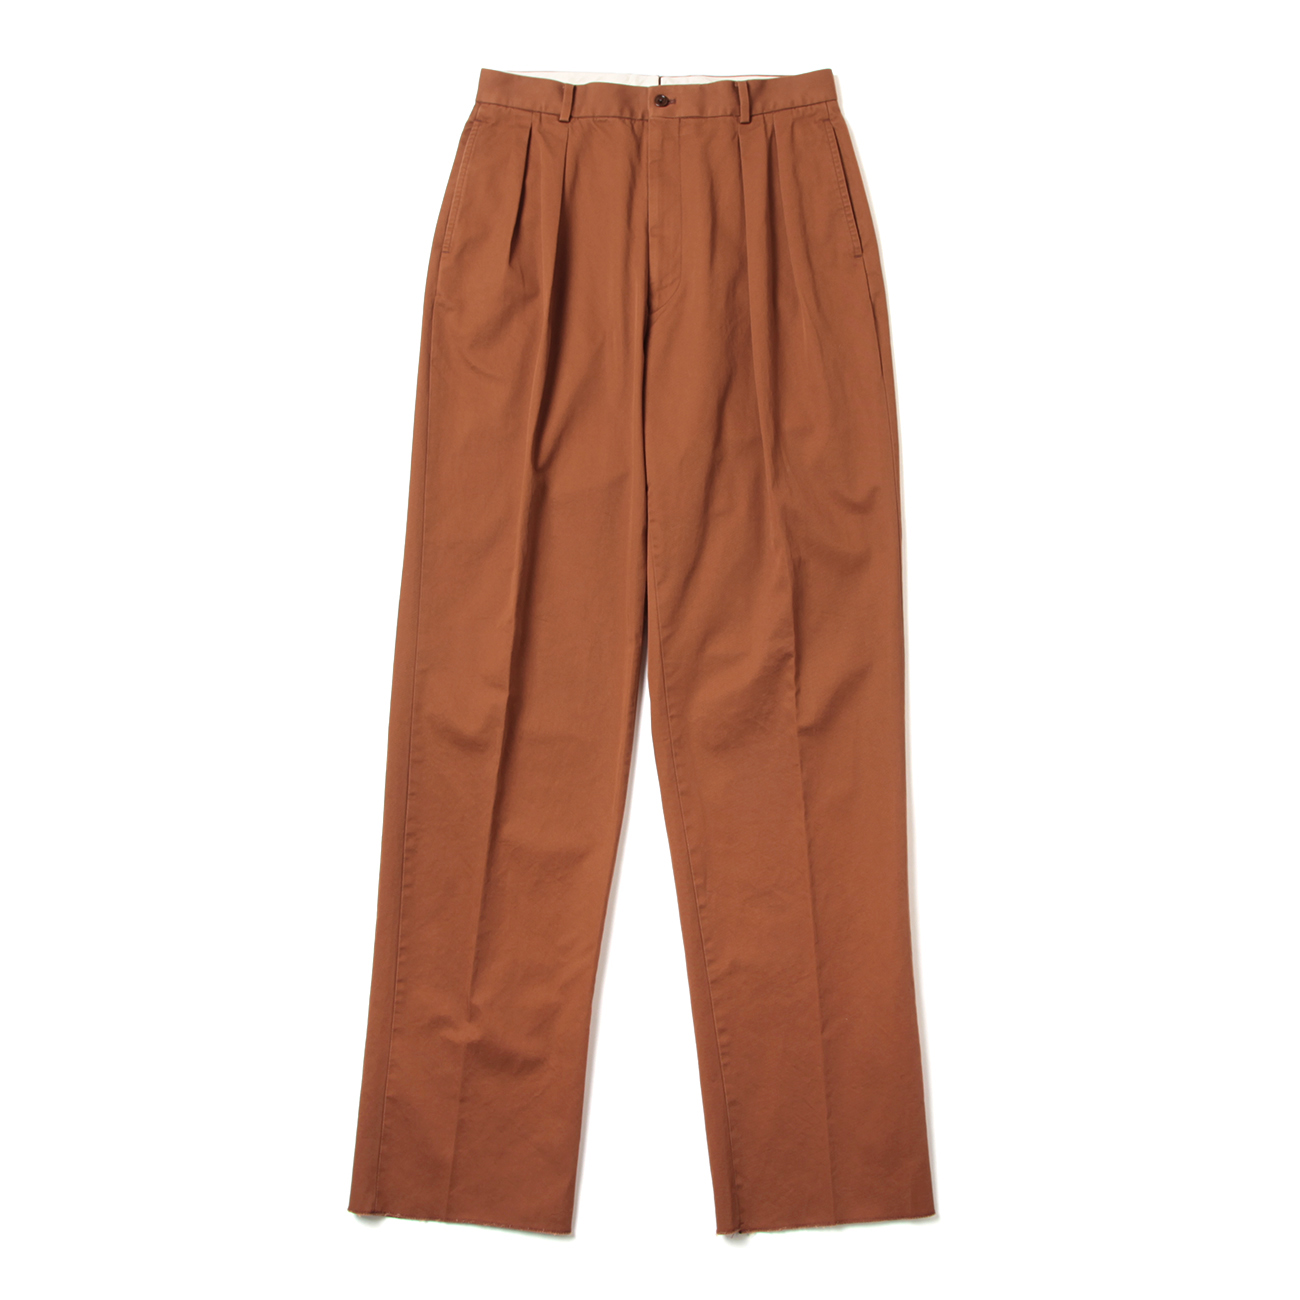 NEAT / ニート   NEAT Chino   Brown   通販   正規取扱店   COLLECT